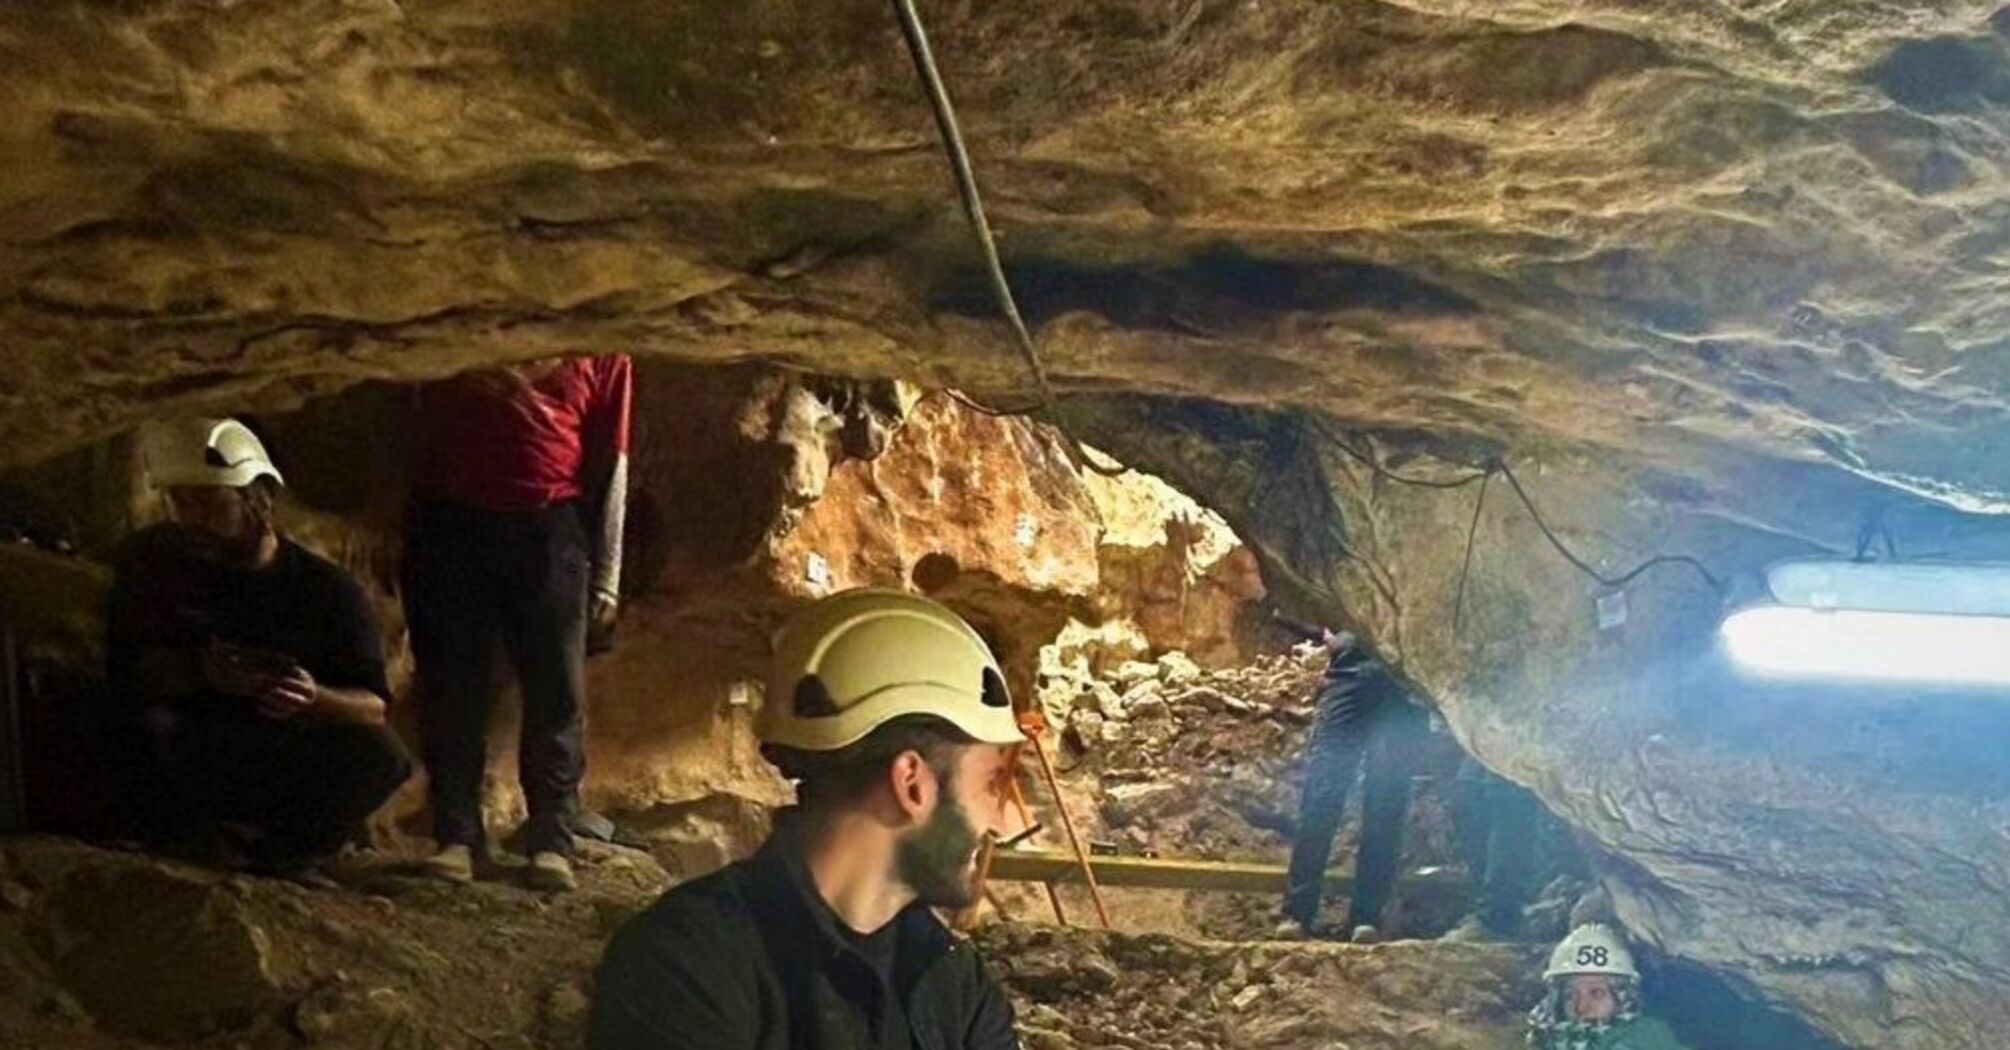 A cave-tomb with thousands of human and animal skeletons discovered in Spain (photo)